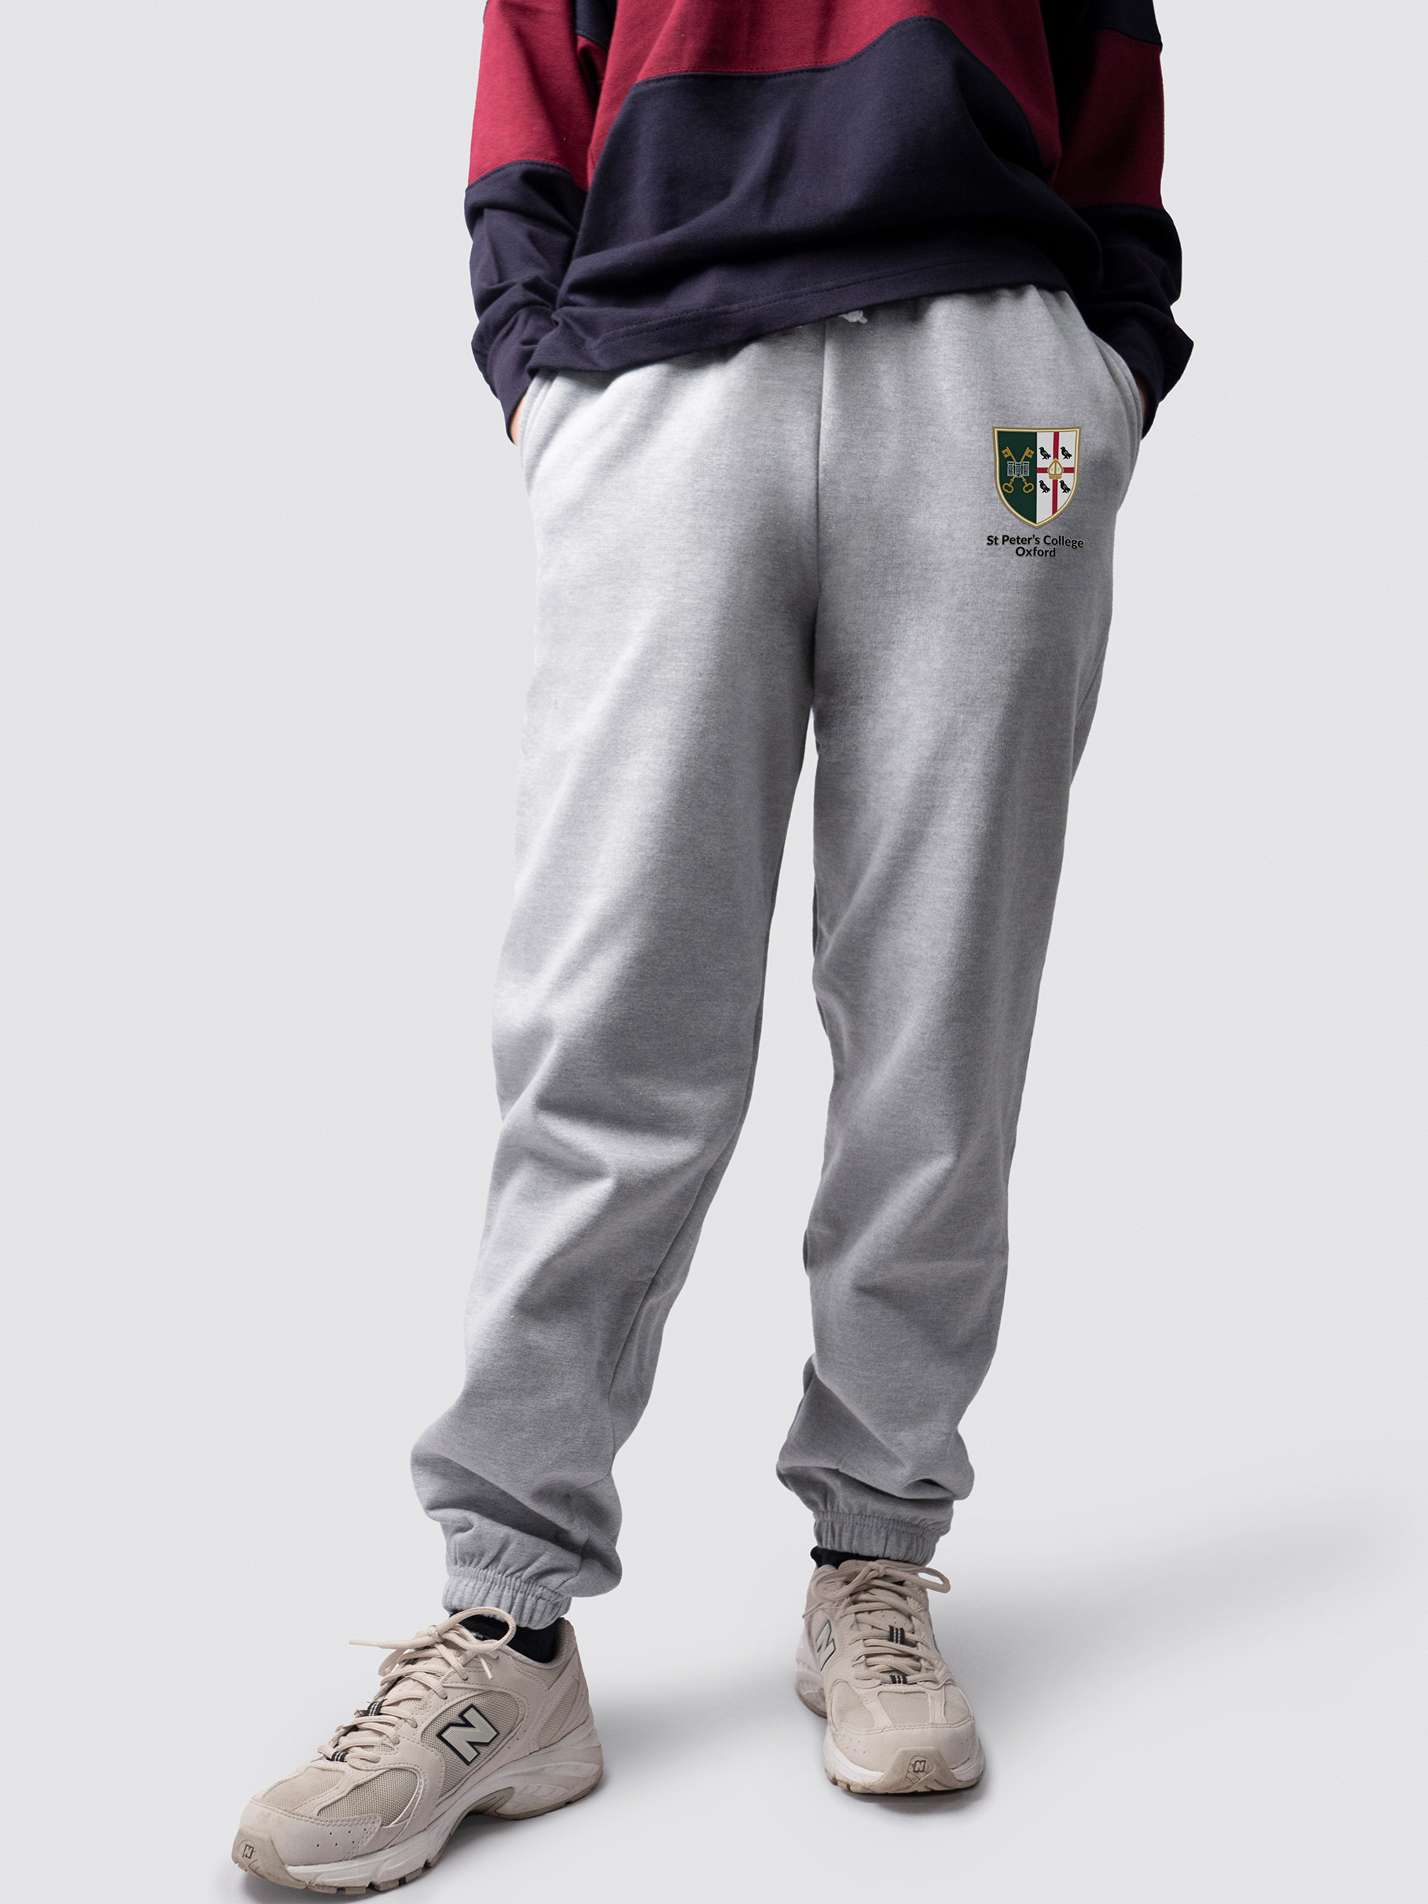 undergraduate cuffed sweatpants, made from soft cotton fabric, with St Peter's logo